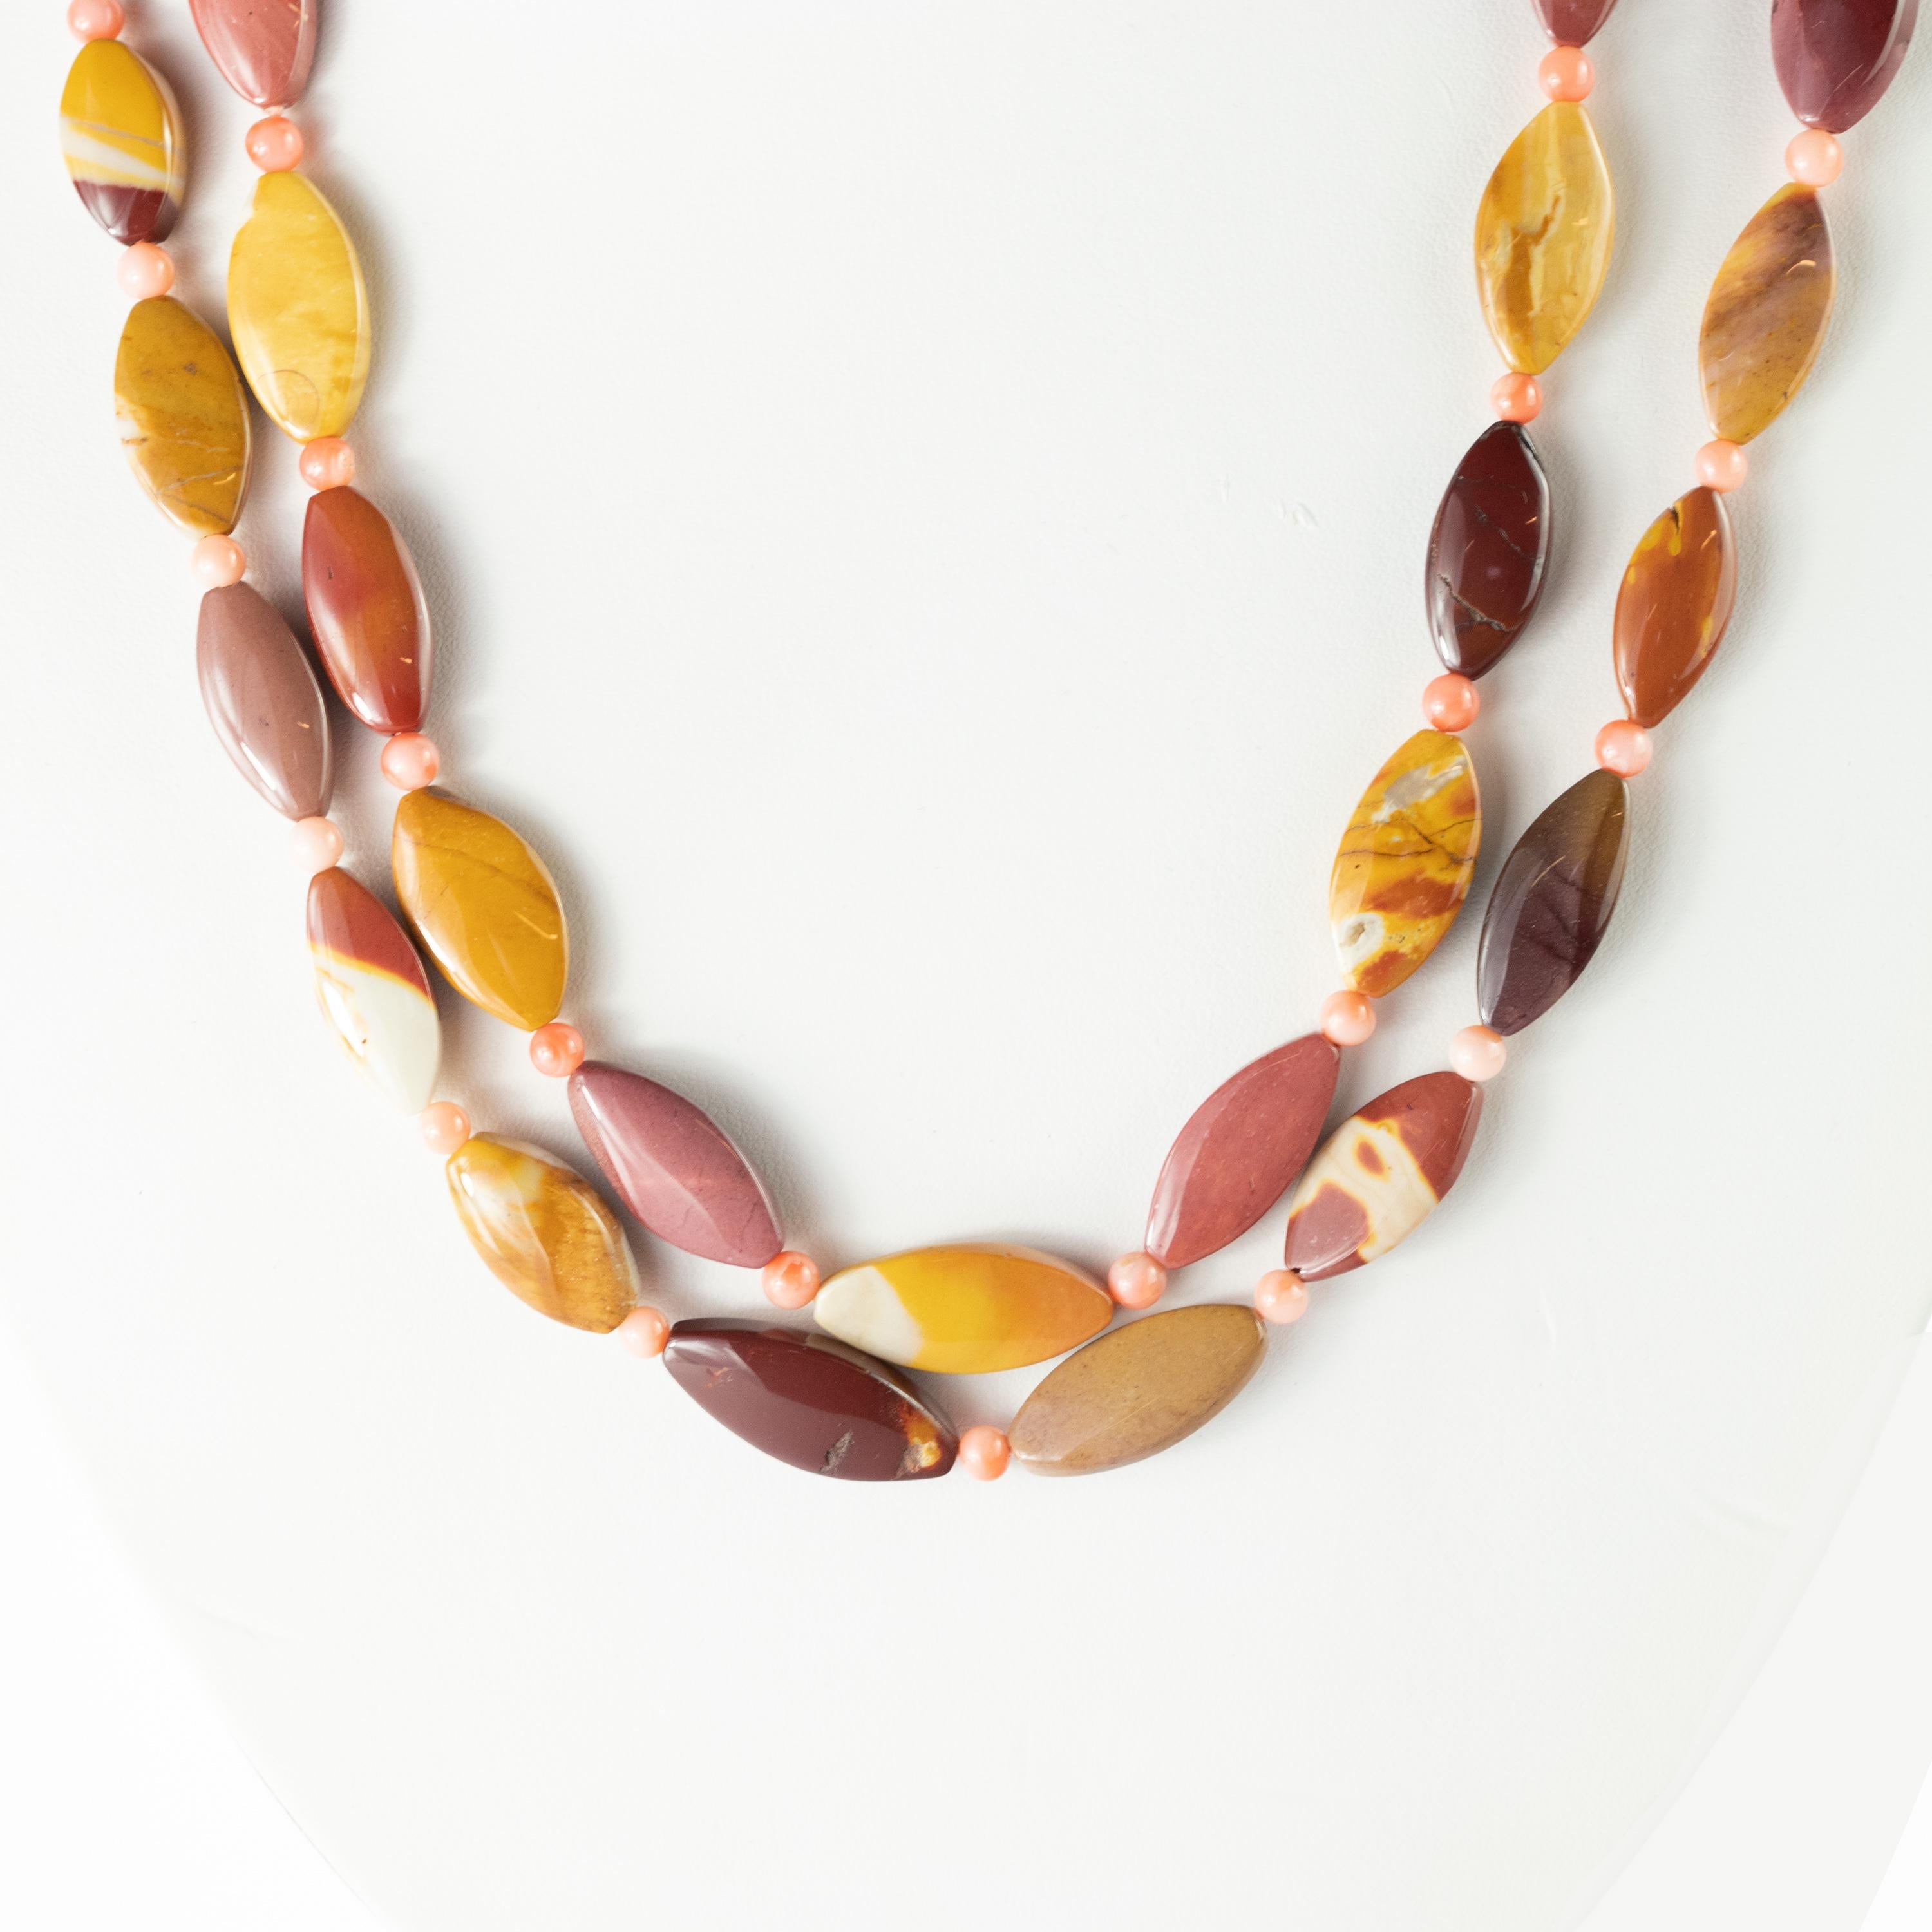 Mokaite jasper interspersed with pink coral melted into a fabulous beaded and boho design. A fashionable wrap around style that managed to give life to a young and passionate jewel. This epic statement necklace is an outstanding display of color and